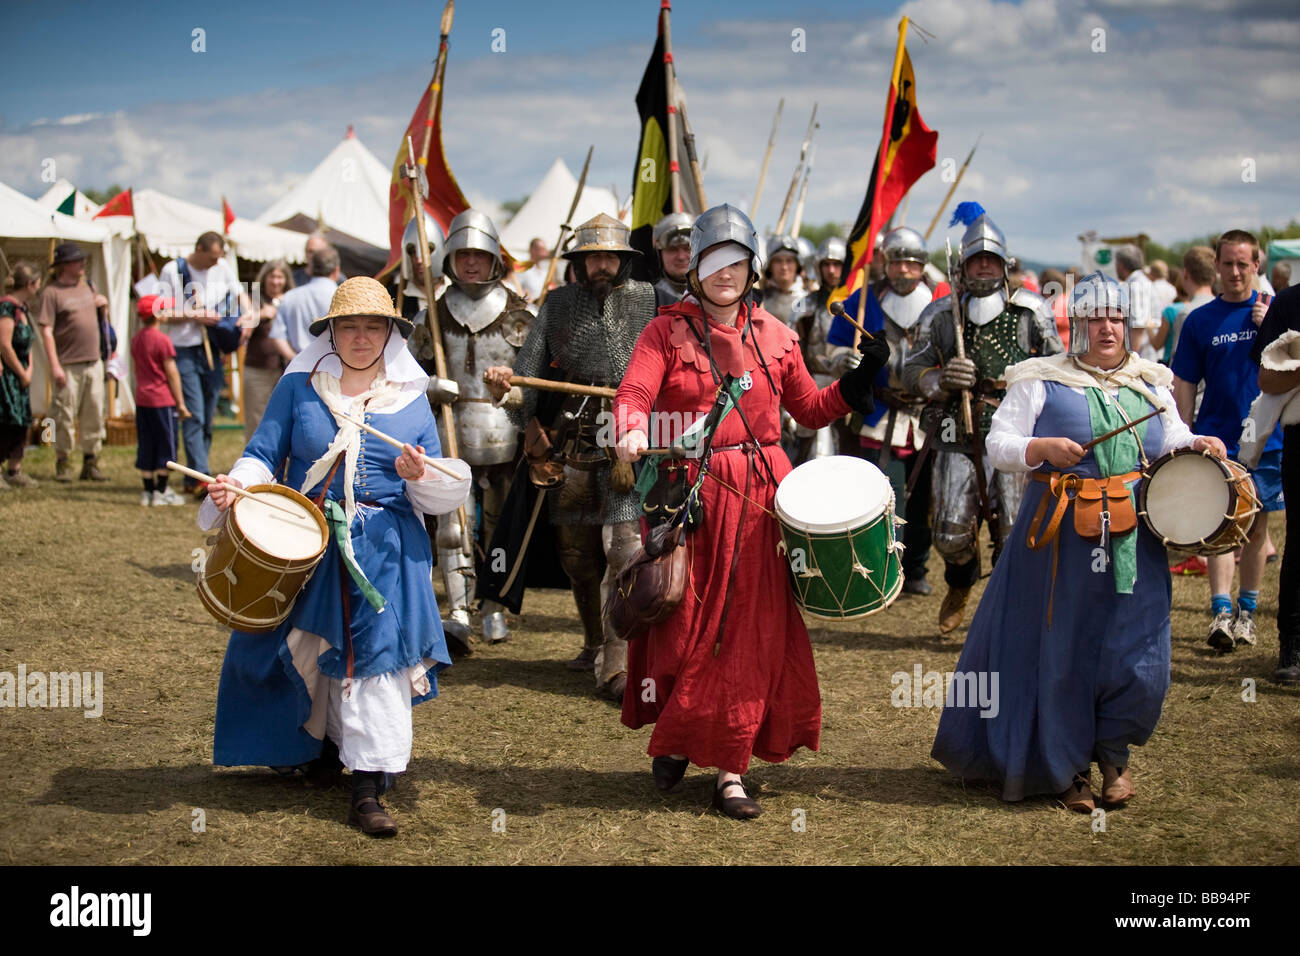 Female drummers lead a column of knights at Tewkesbury Medieval Festival 2008, Gloucestershire, UK Stock Photo